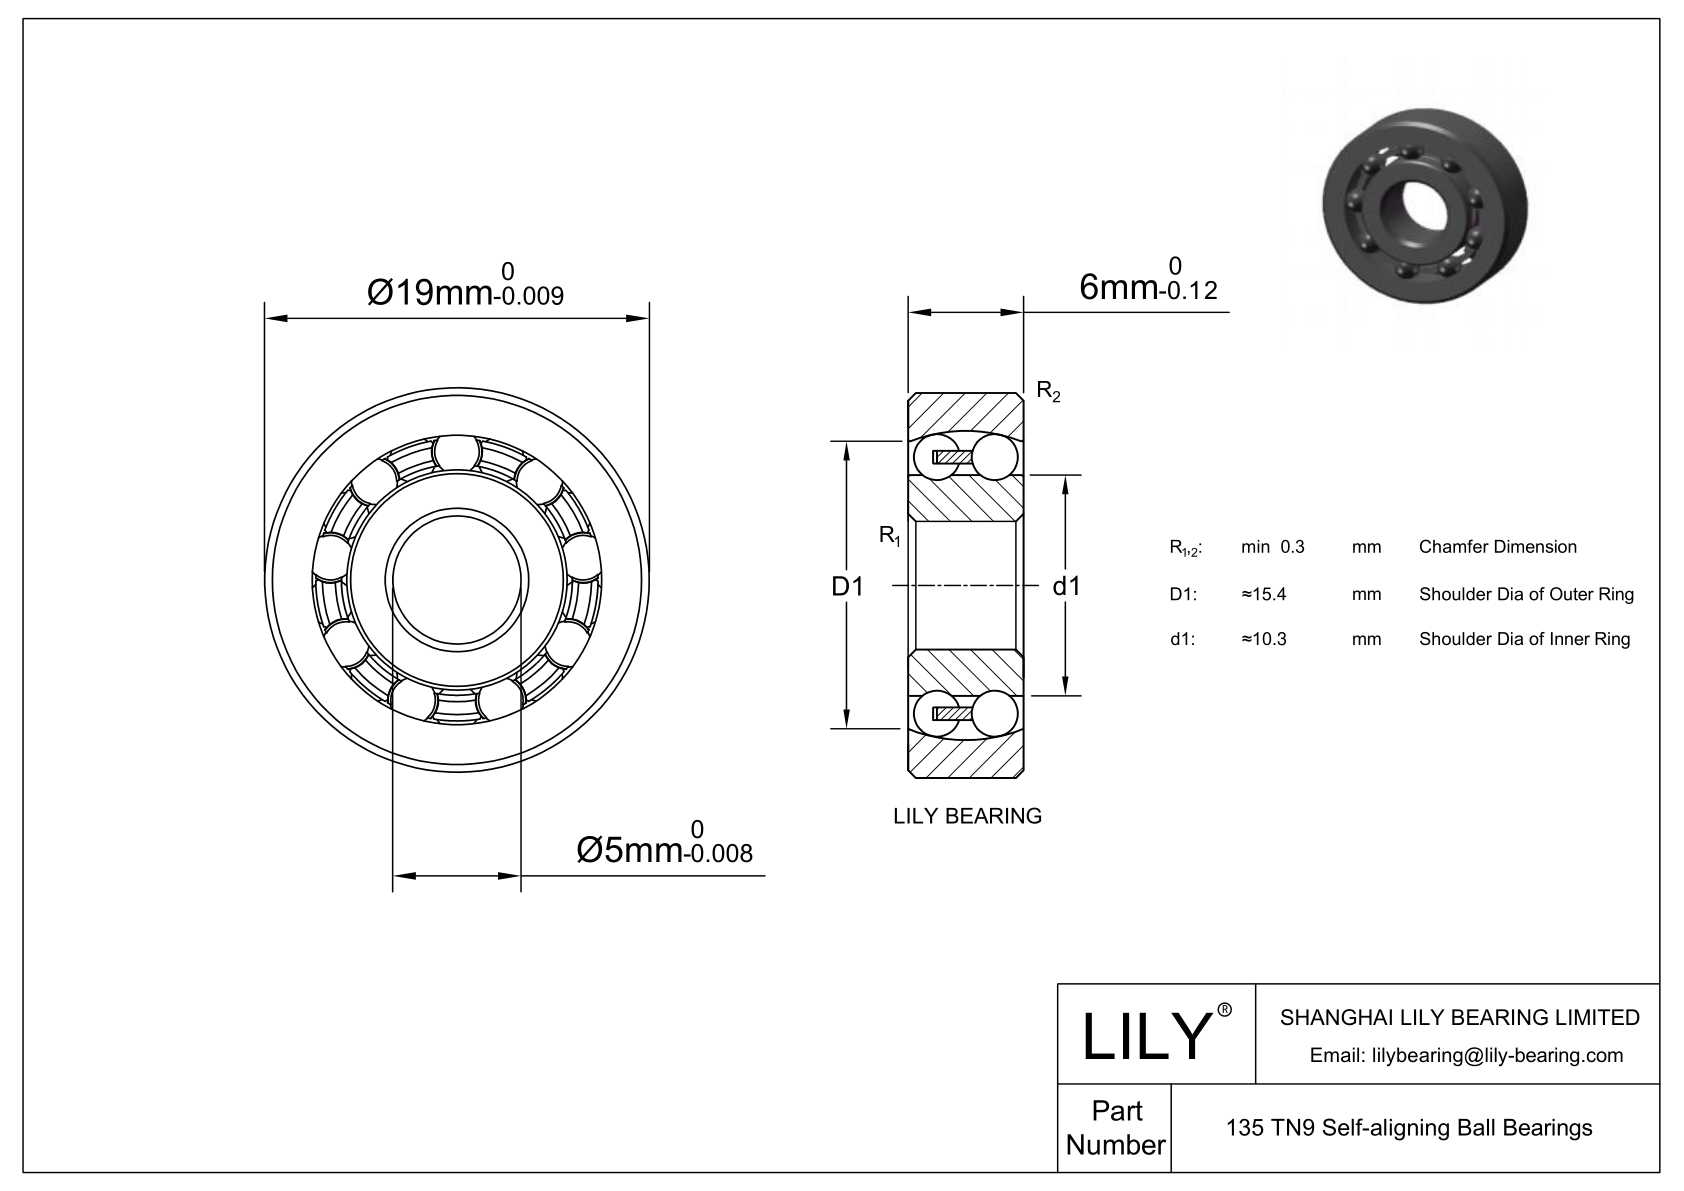 CE135SI Silicon Nitride Self Aligning Ball Bearings cad drawing